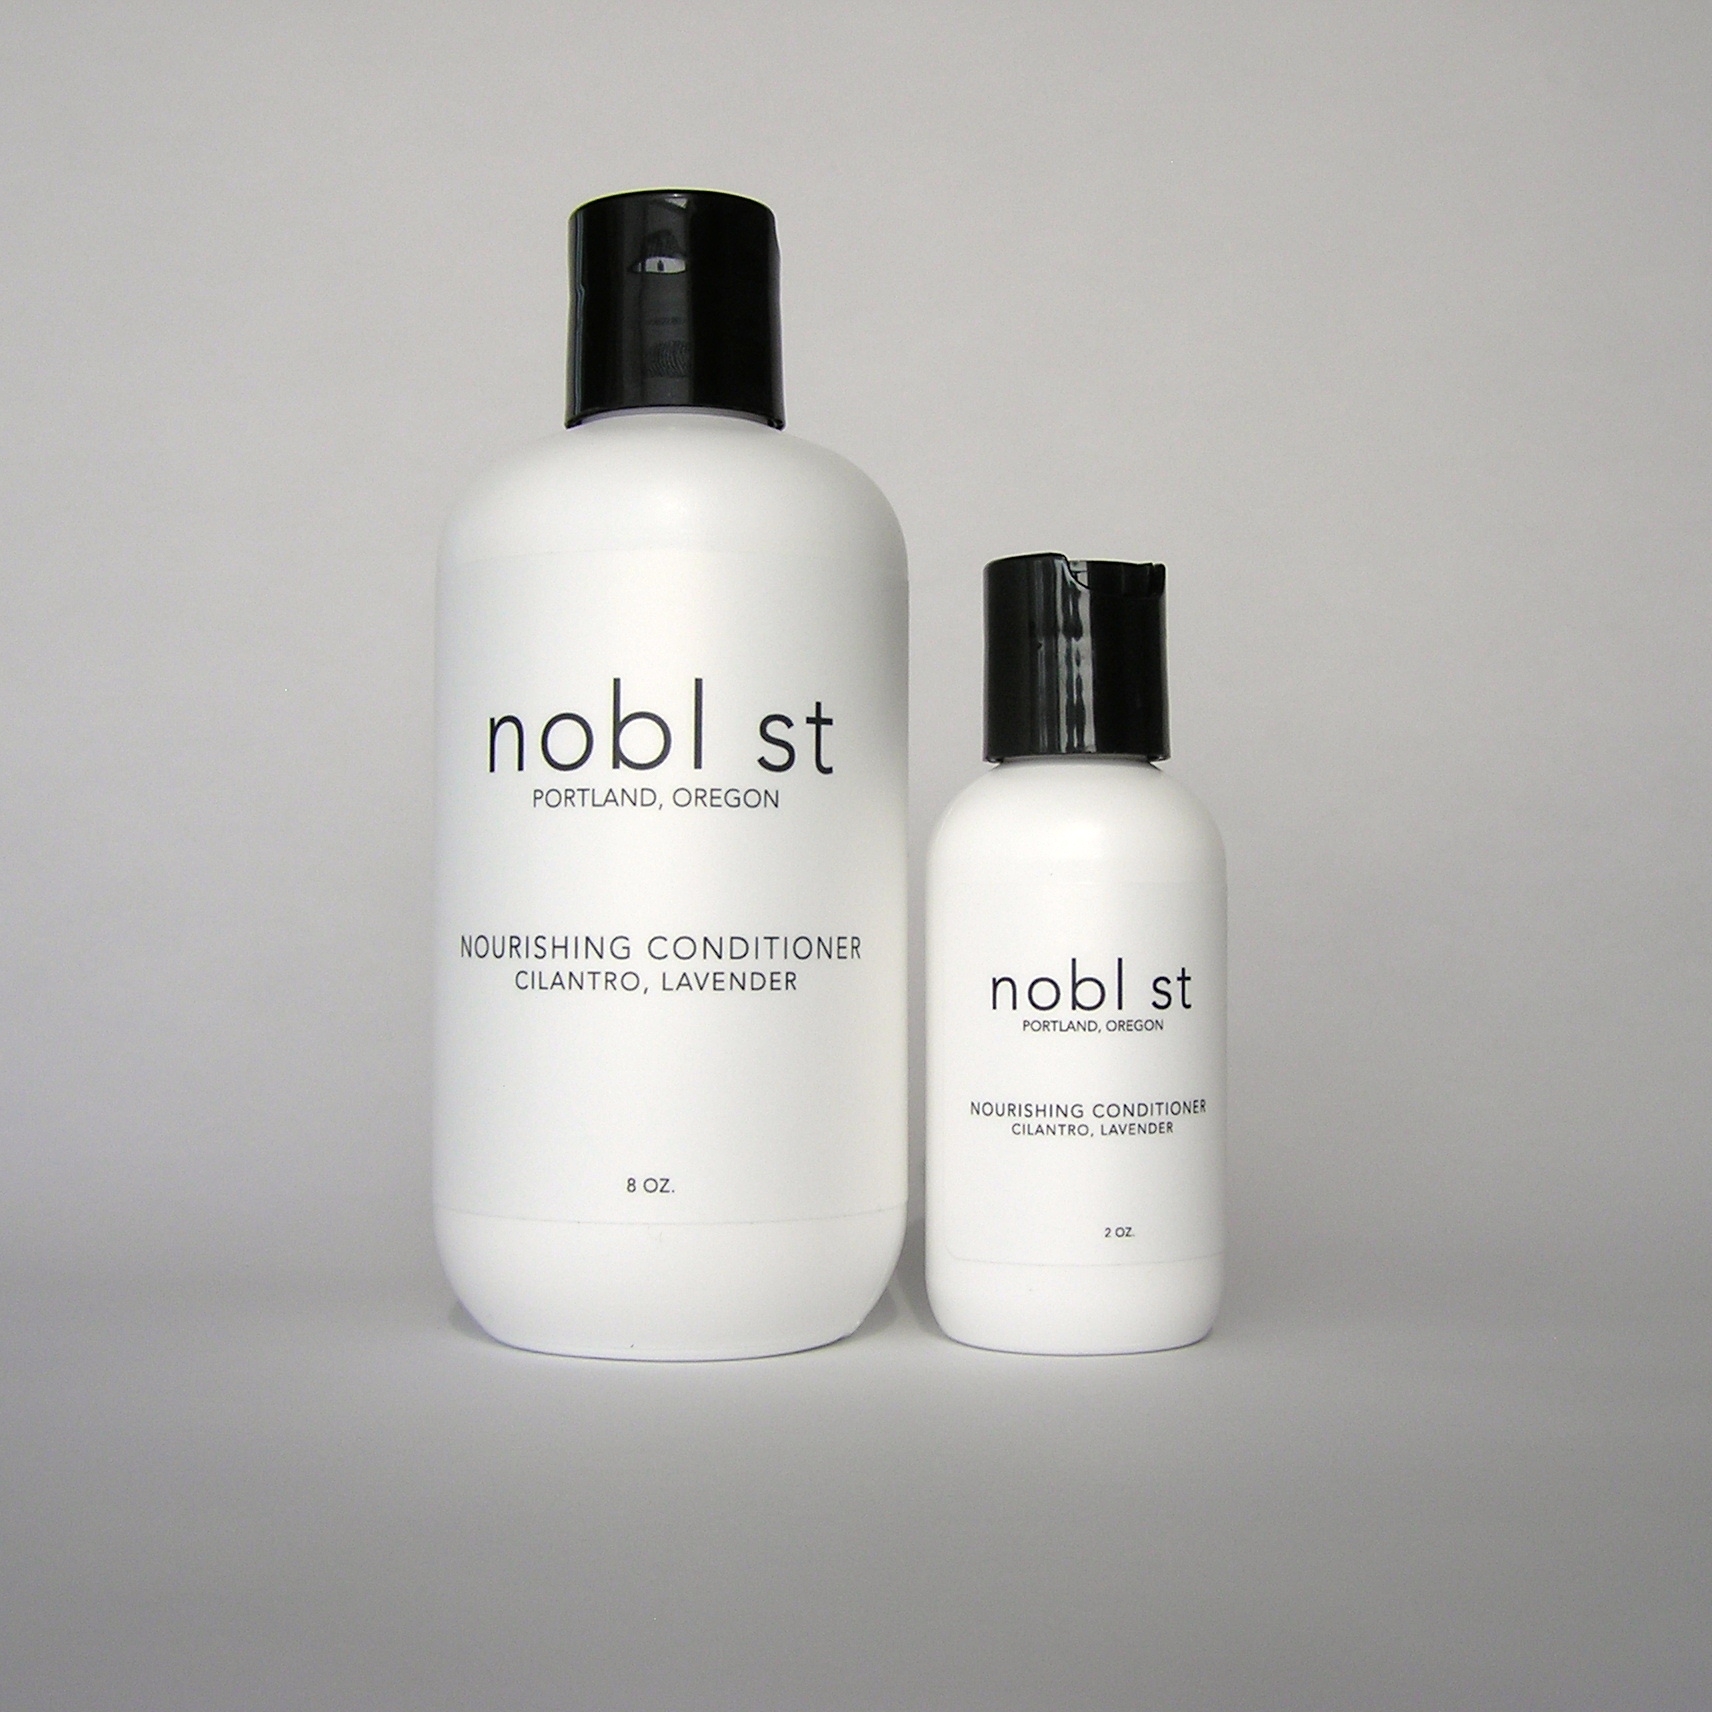 The Nobl St. Travel Set travel product recommended by Silvia Ospina on Lifney.